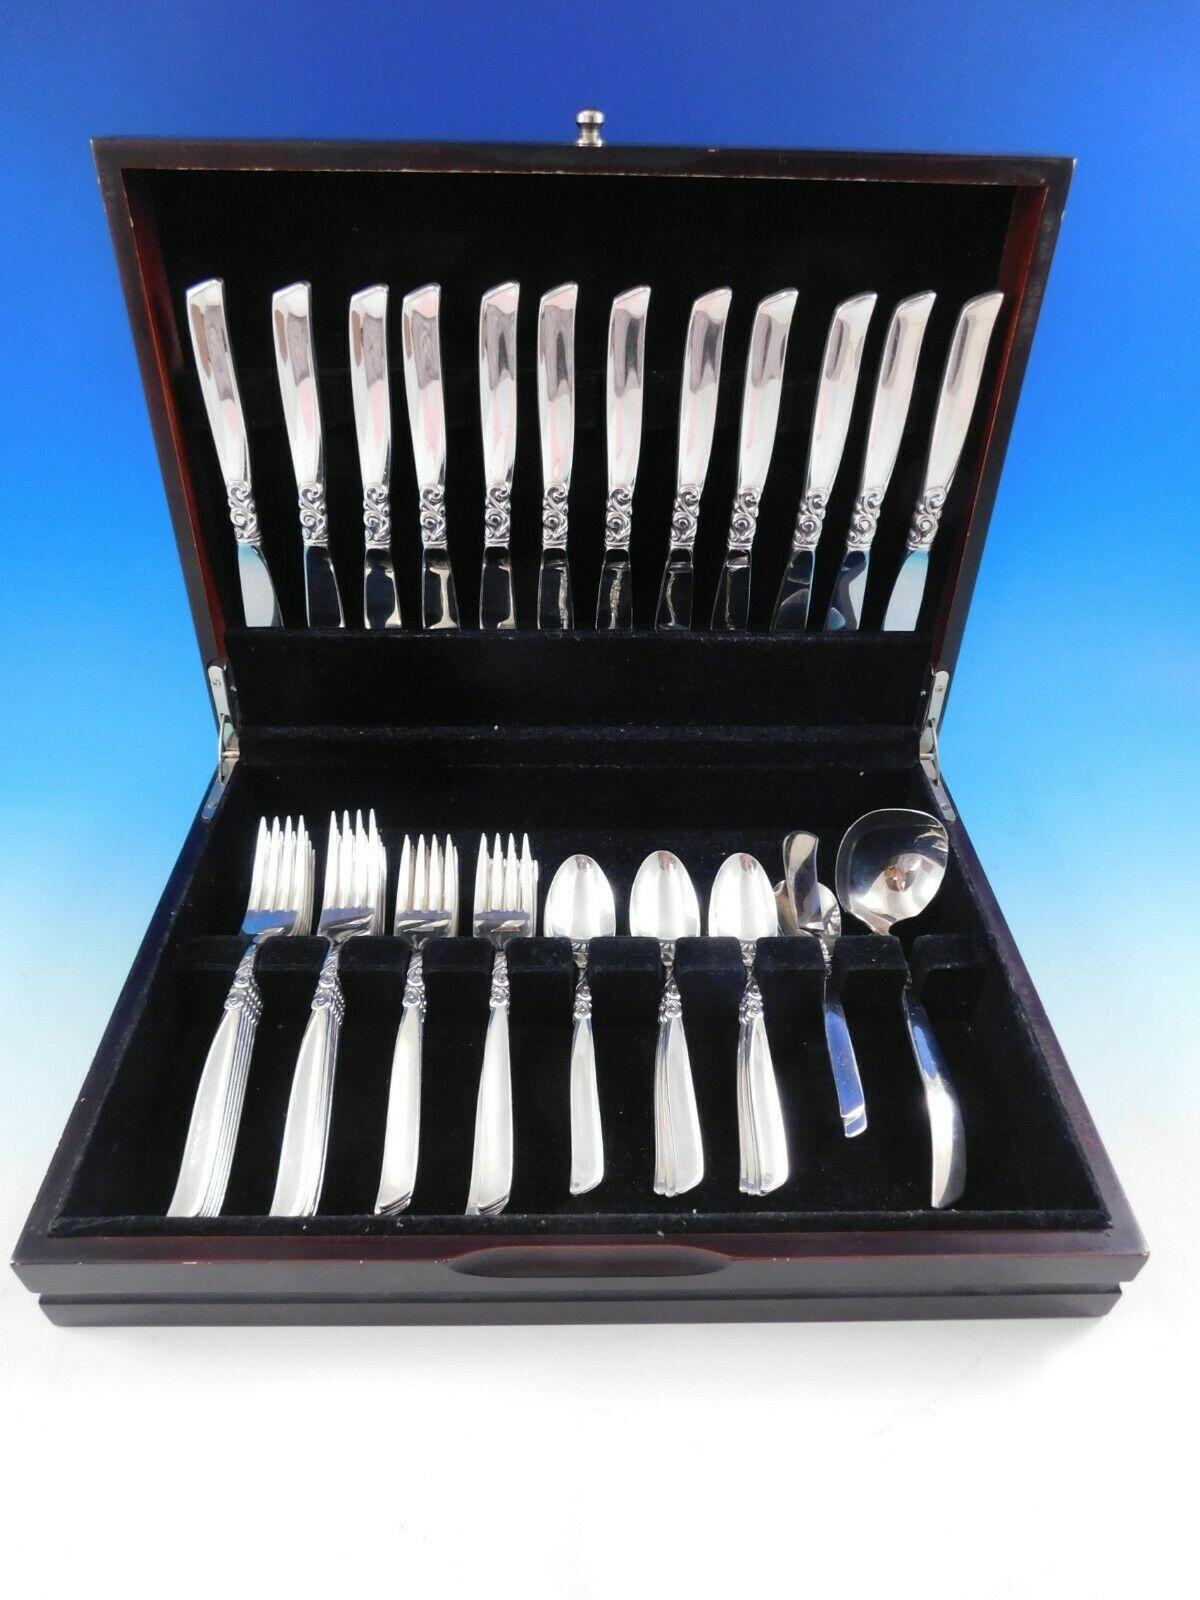 South Seas by Community silverplate flatware set - 51 pieces. This set includes:

12 knives, 8 3/8